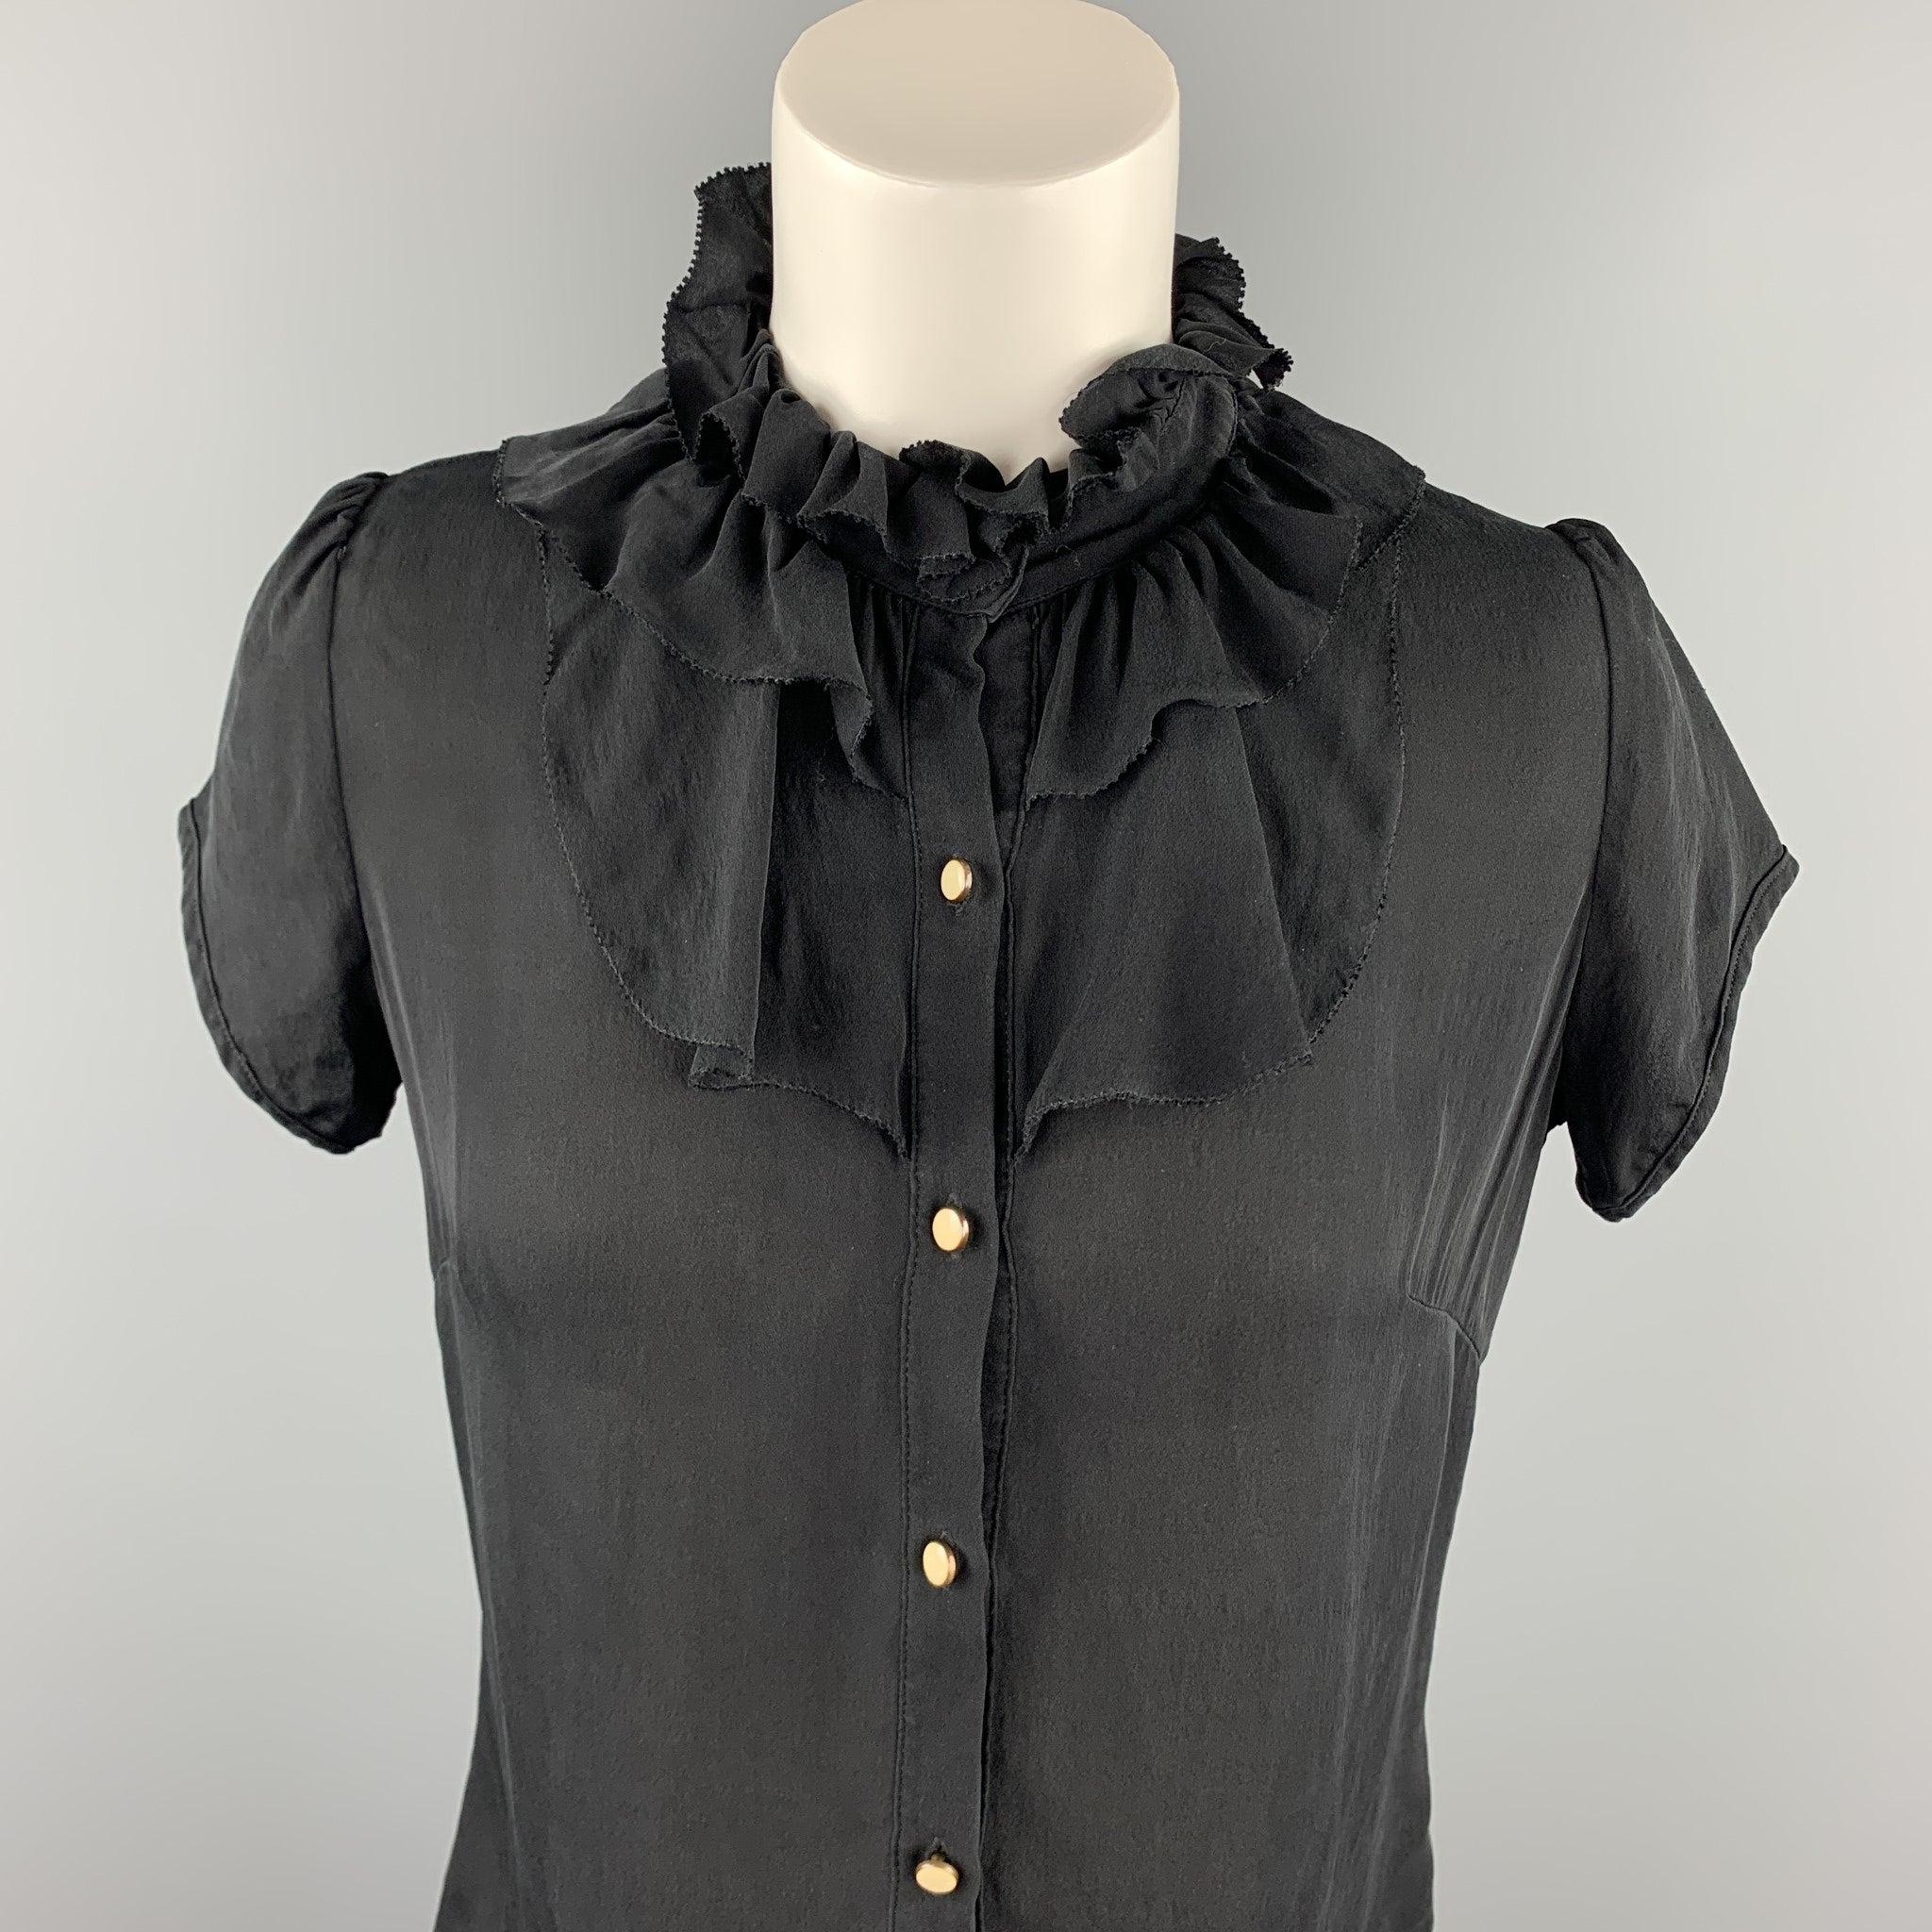 BARNEY'S NEW YORK blouse comes in a black silk featuring a front ruffled design and buttoned closure.
 Very Good
 Pre-Owned Condition. 
 

 Marked:  2 
 

 Measurements: 
  
 Shoulder: 13.5 inches 
 Bust: 34 inches 
 Sleeve: 5.5 inches 
 Length: 22